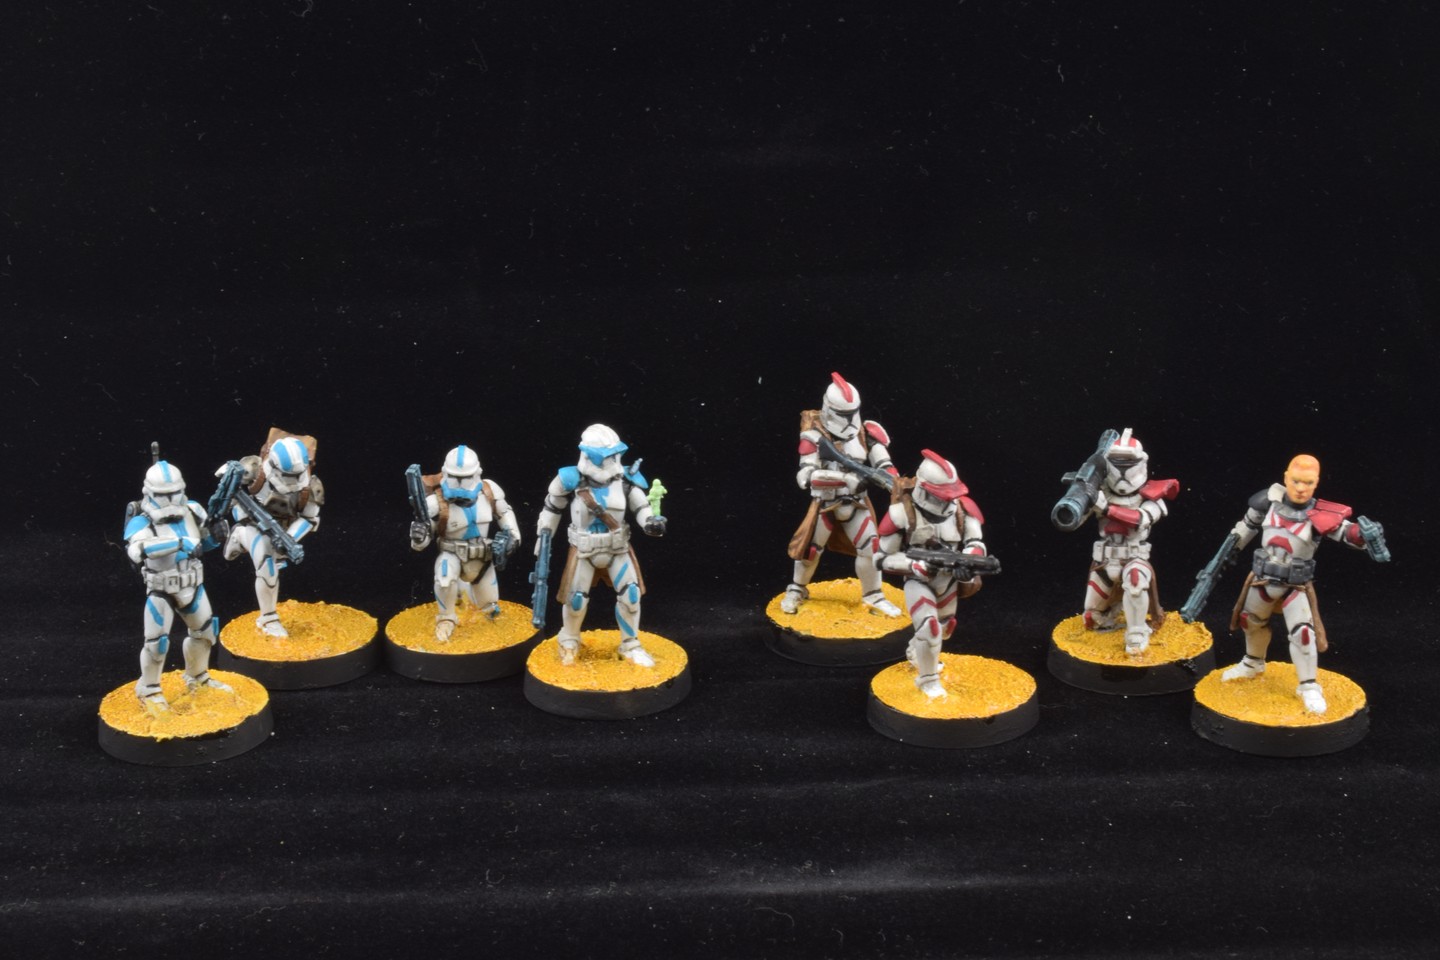 to be continued...more upgrades and specialists for phase troopers...no problem, here the come. fresh from factory #starwars #starwarsfan #starwaslegion #ffg #fantasyflightgames #asmodee #swlclones #starwarslegionclonewars #starwarslegionclones #clonewars #clonetrooper #clonespecialist #cloneupgrade #tabletop #miniaturepainter #minipainting #paintingminiatures #paintingacrylic #acrylpaints #vallejo #boardgames #paintminis